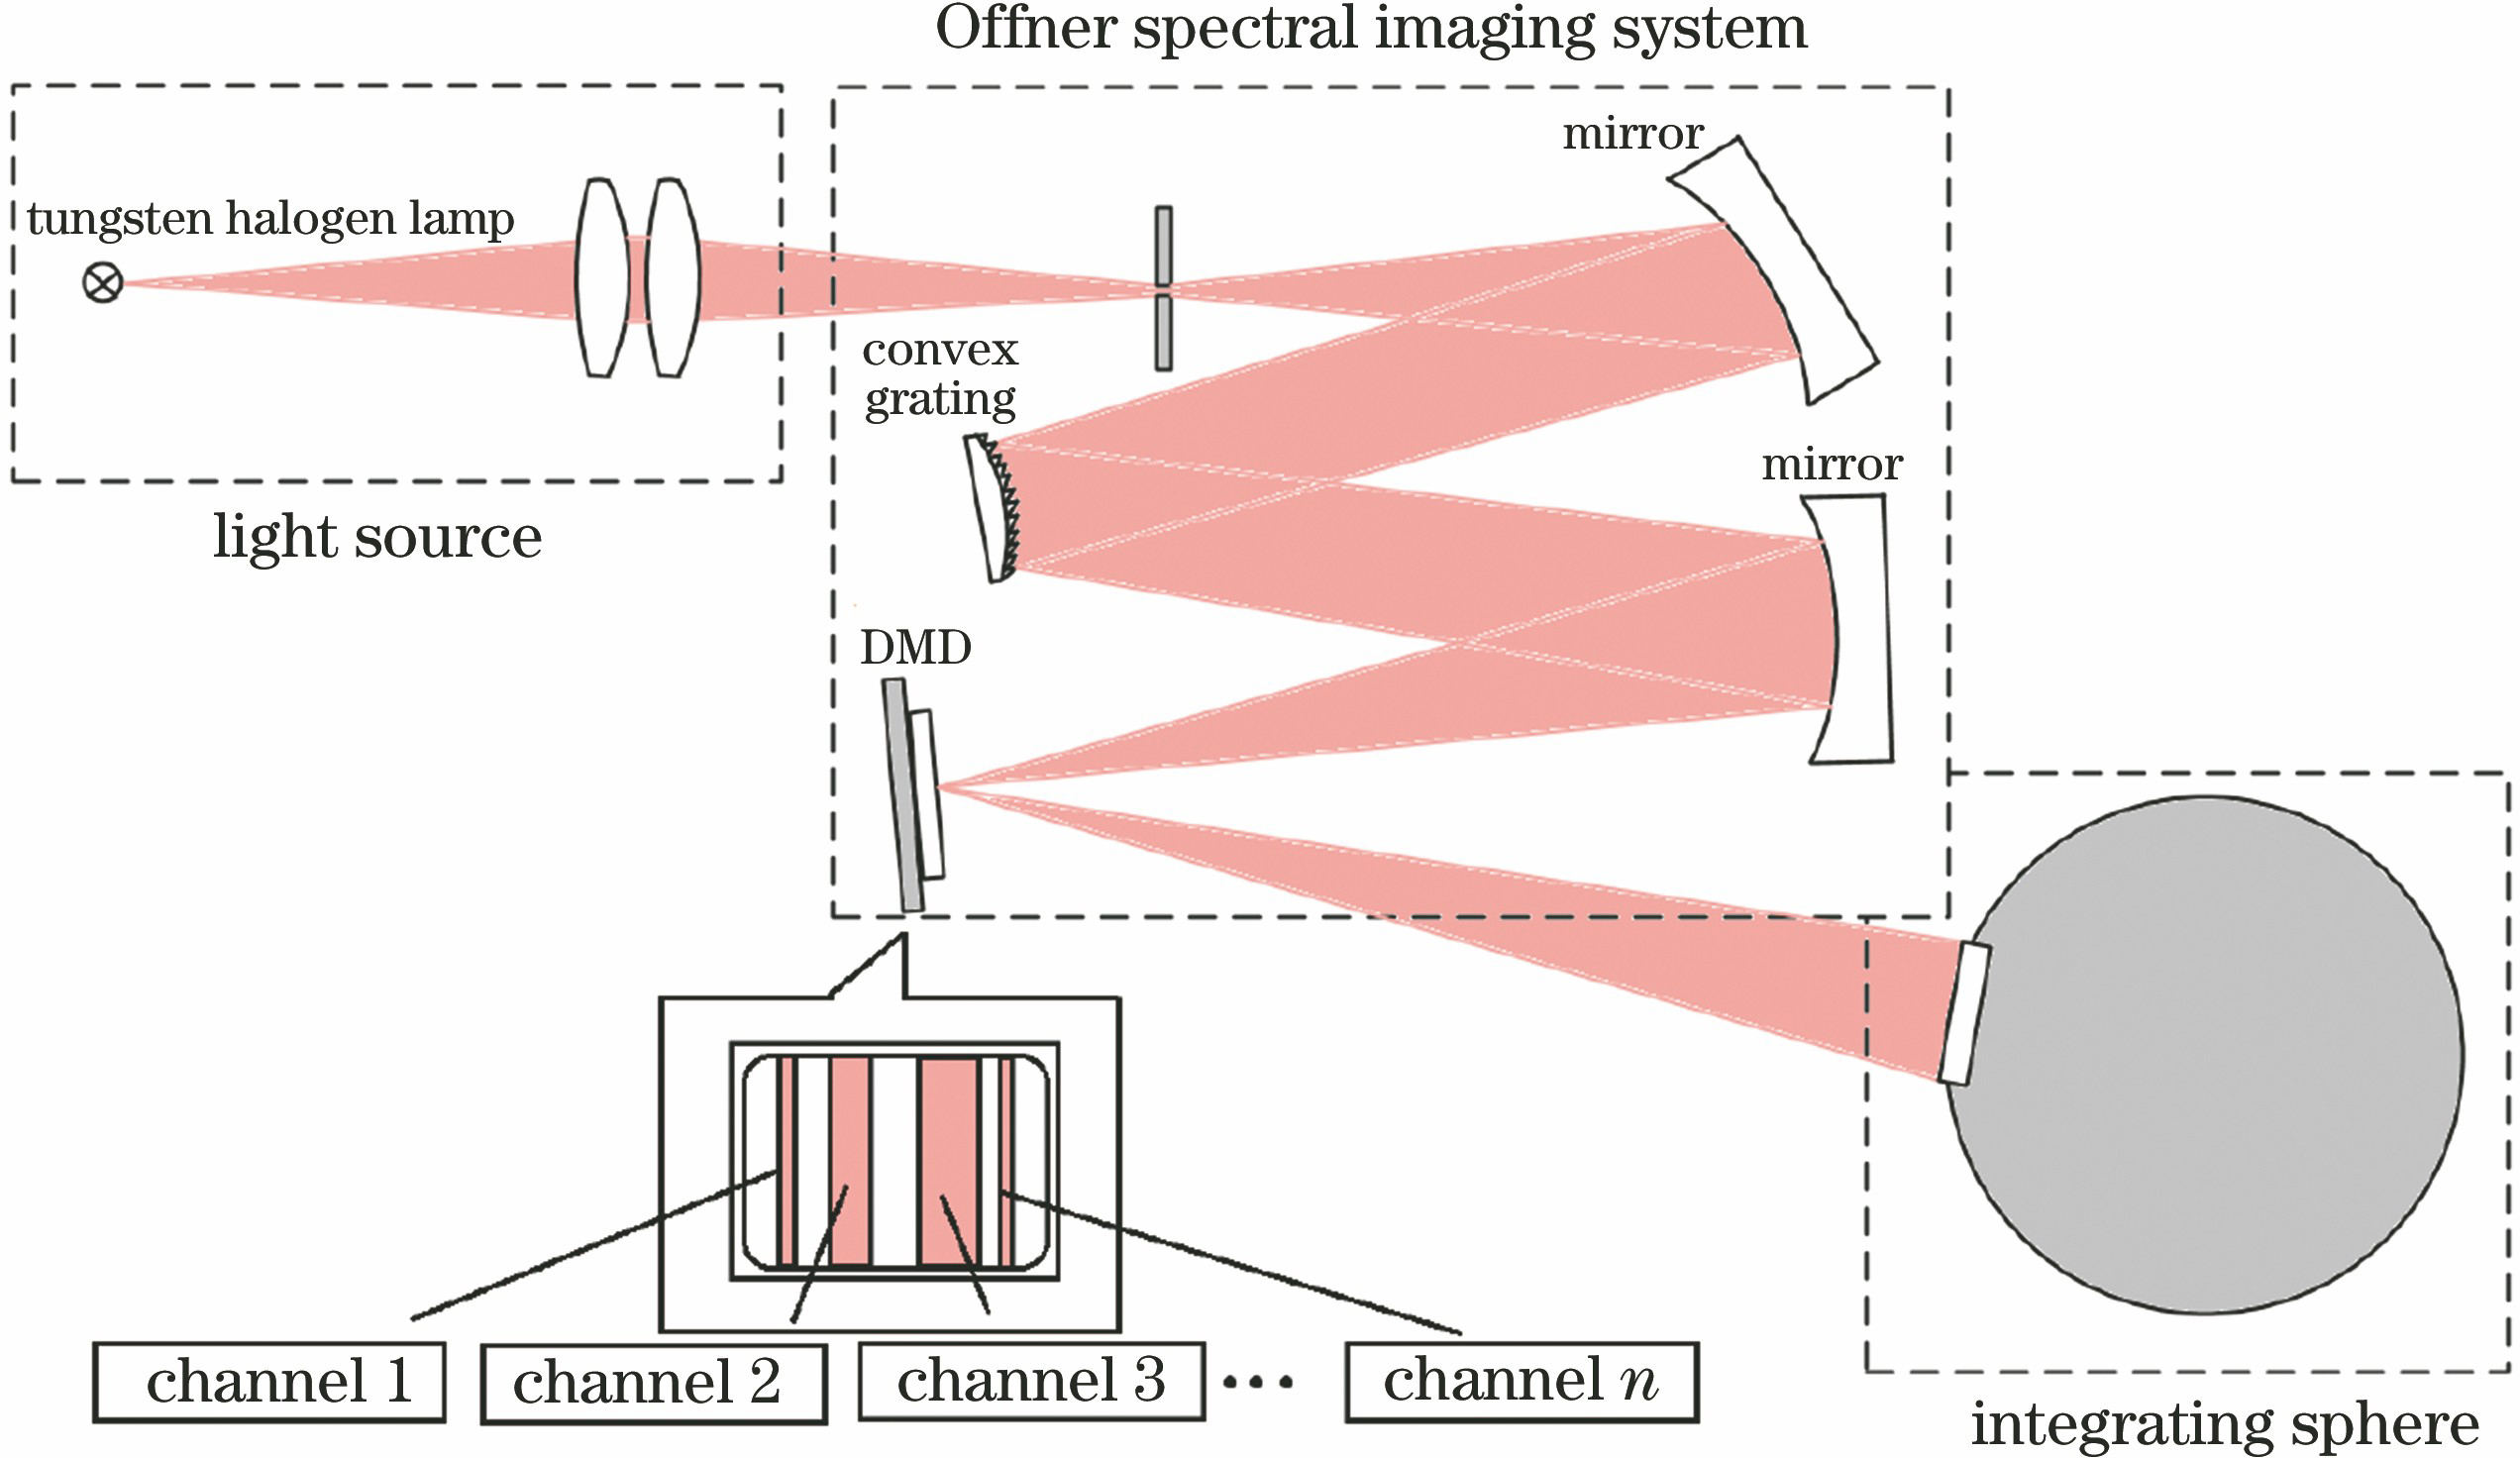 Schematic of spectral radiation calibration system